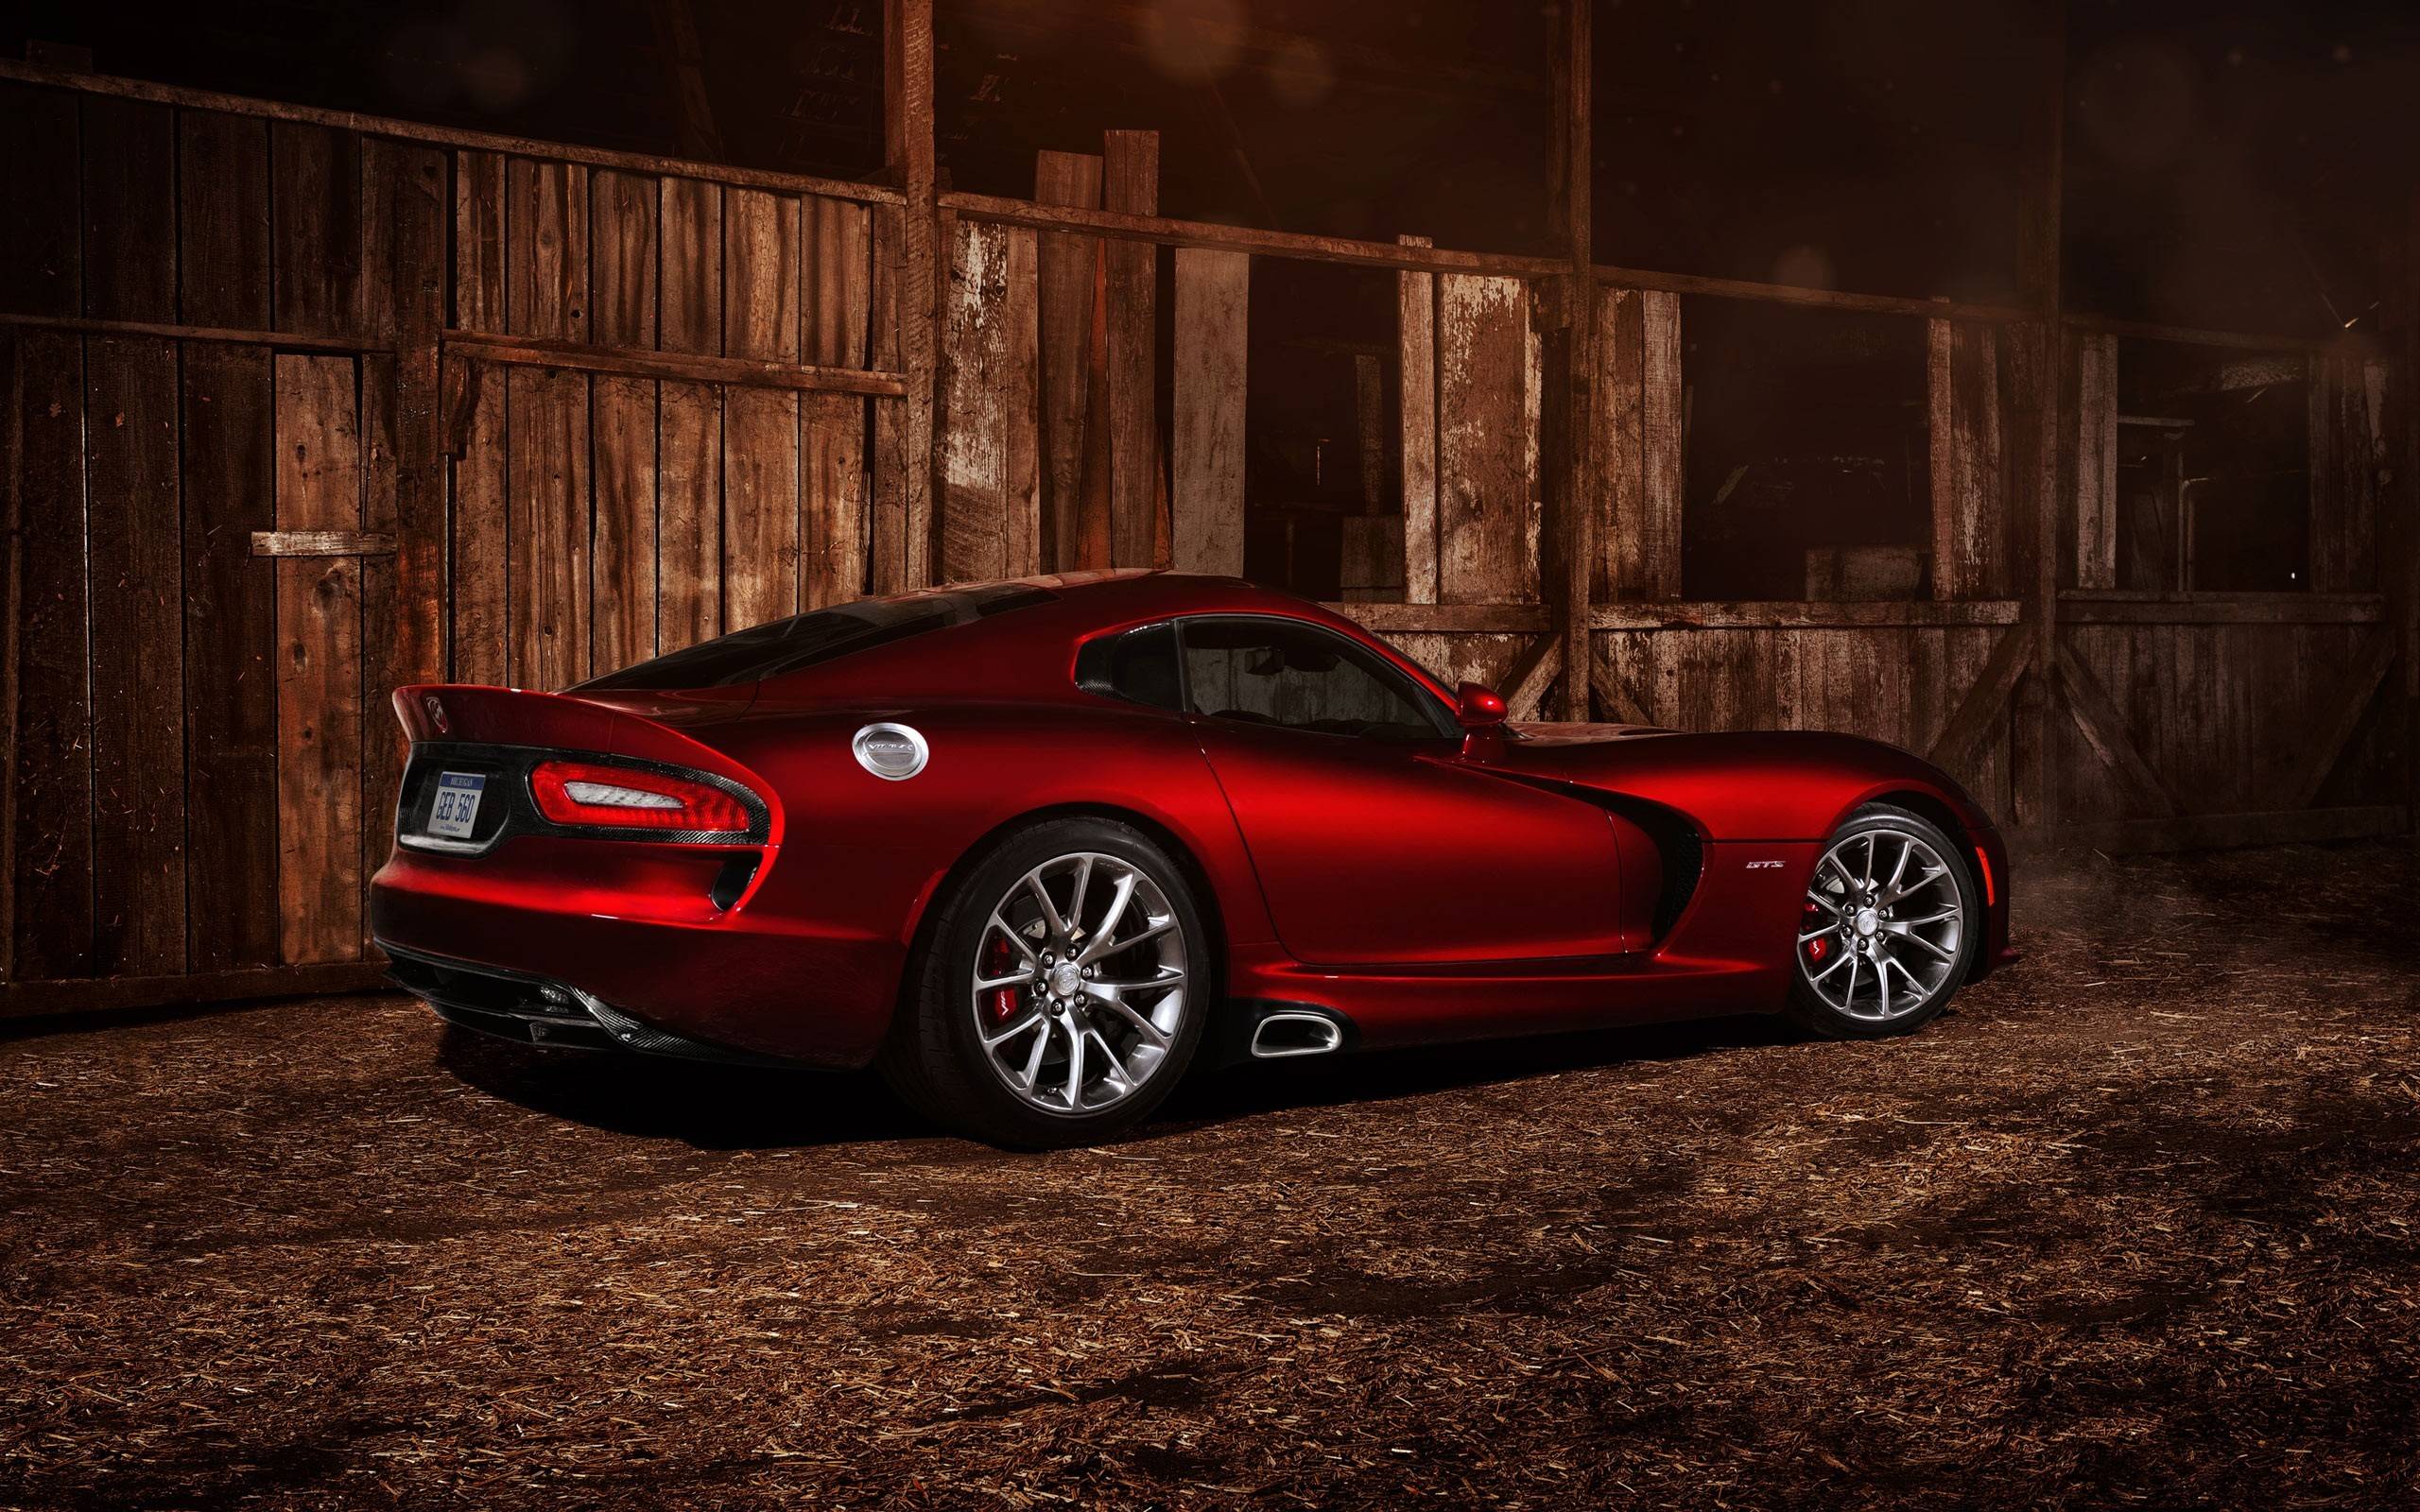 Daily Wallpaper: 2013 Dodge Viper. I Like To Waste My Time